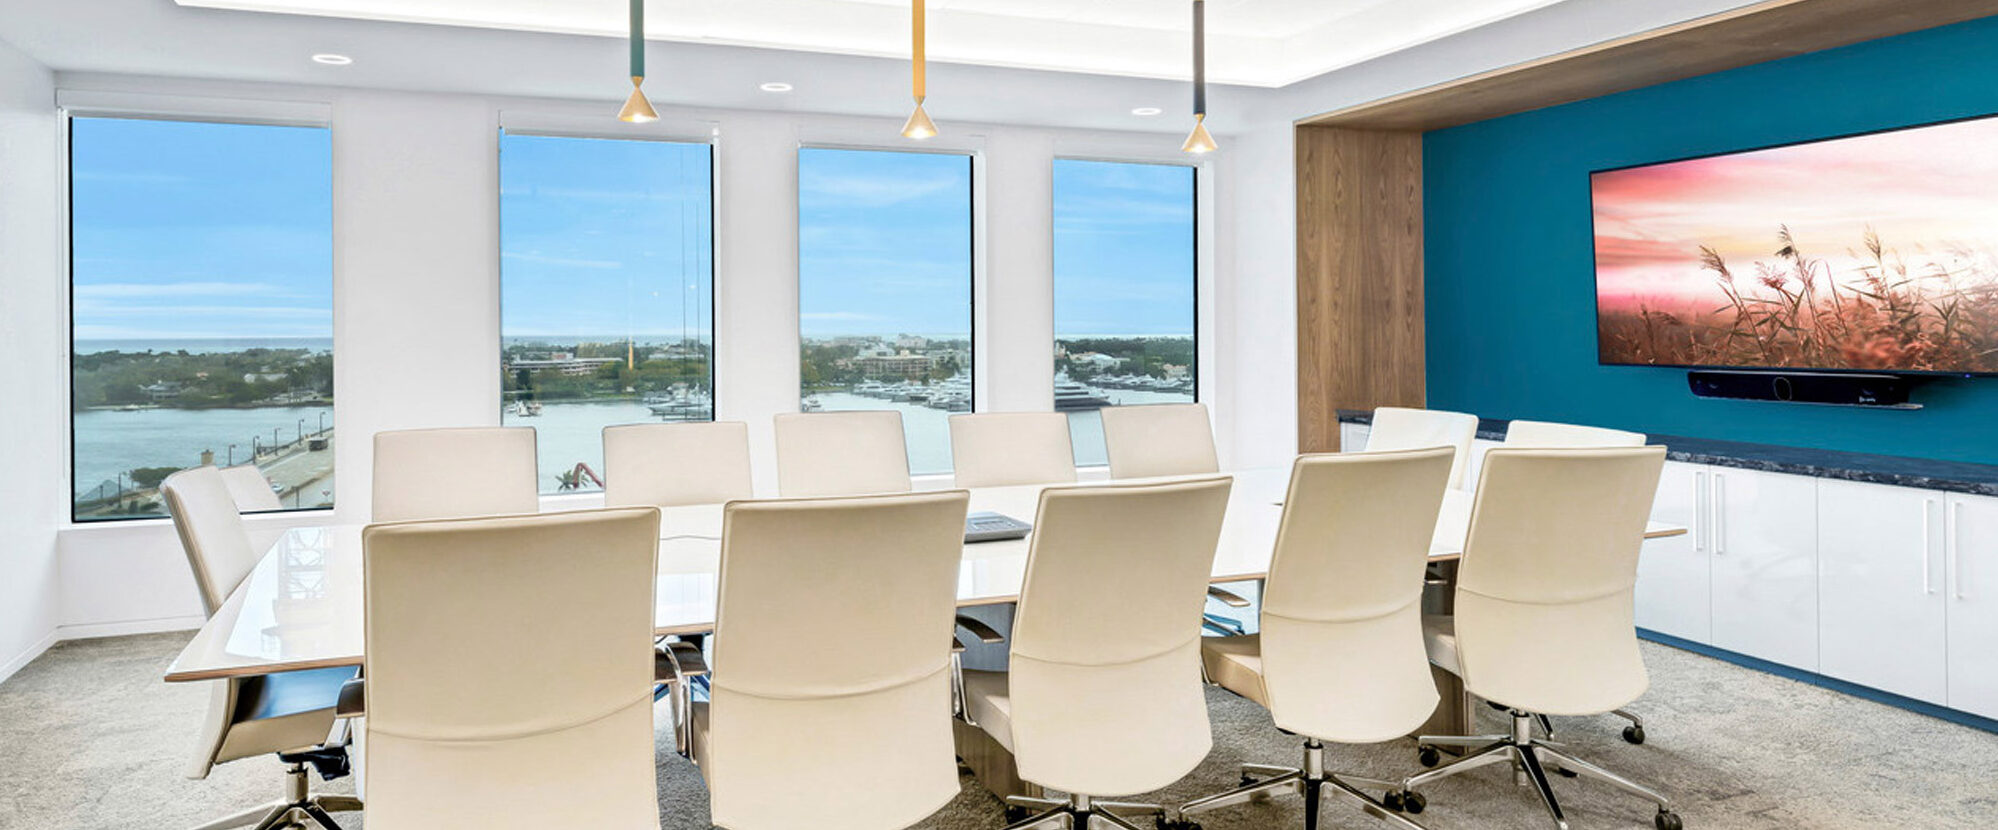 Modern conference room featuring an elongated white table with beige chairs, a wide-screen monitor on a blue accent wall, and pendant lighting in muted tones against a panoramic window backdrop.